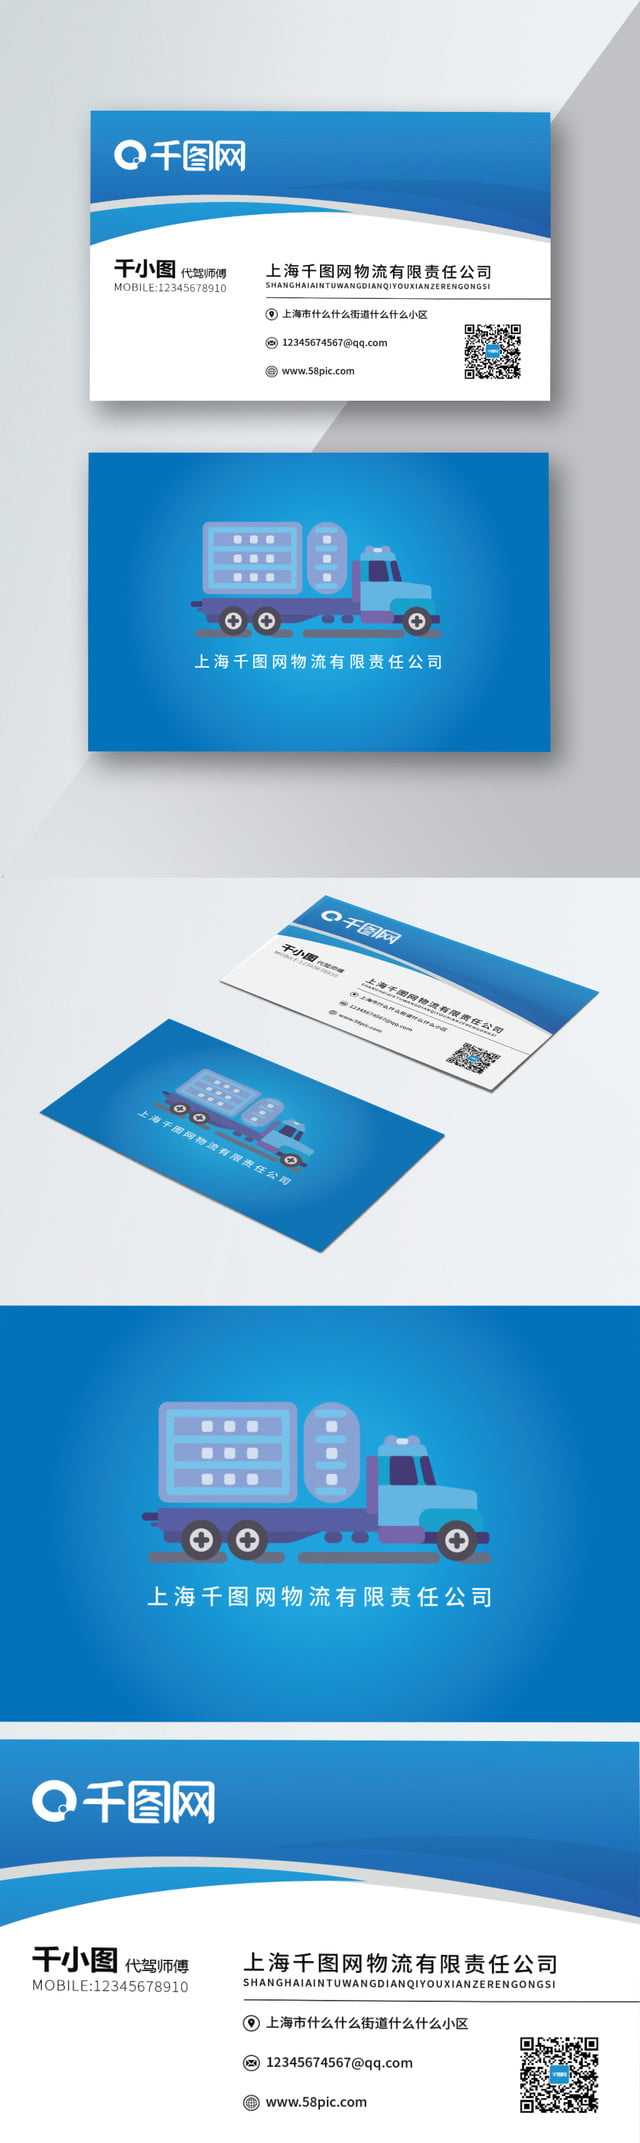 Logistics Company Business Card Vector Material Logistics For Transport Business Cards Templates Free